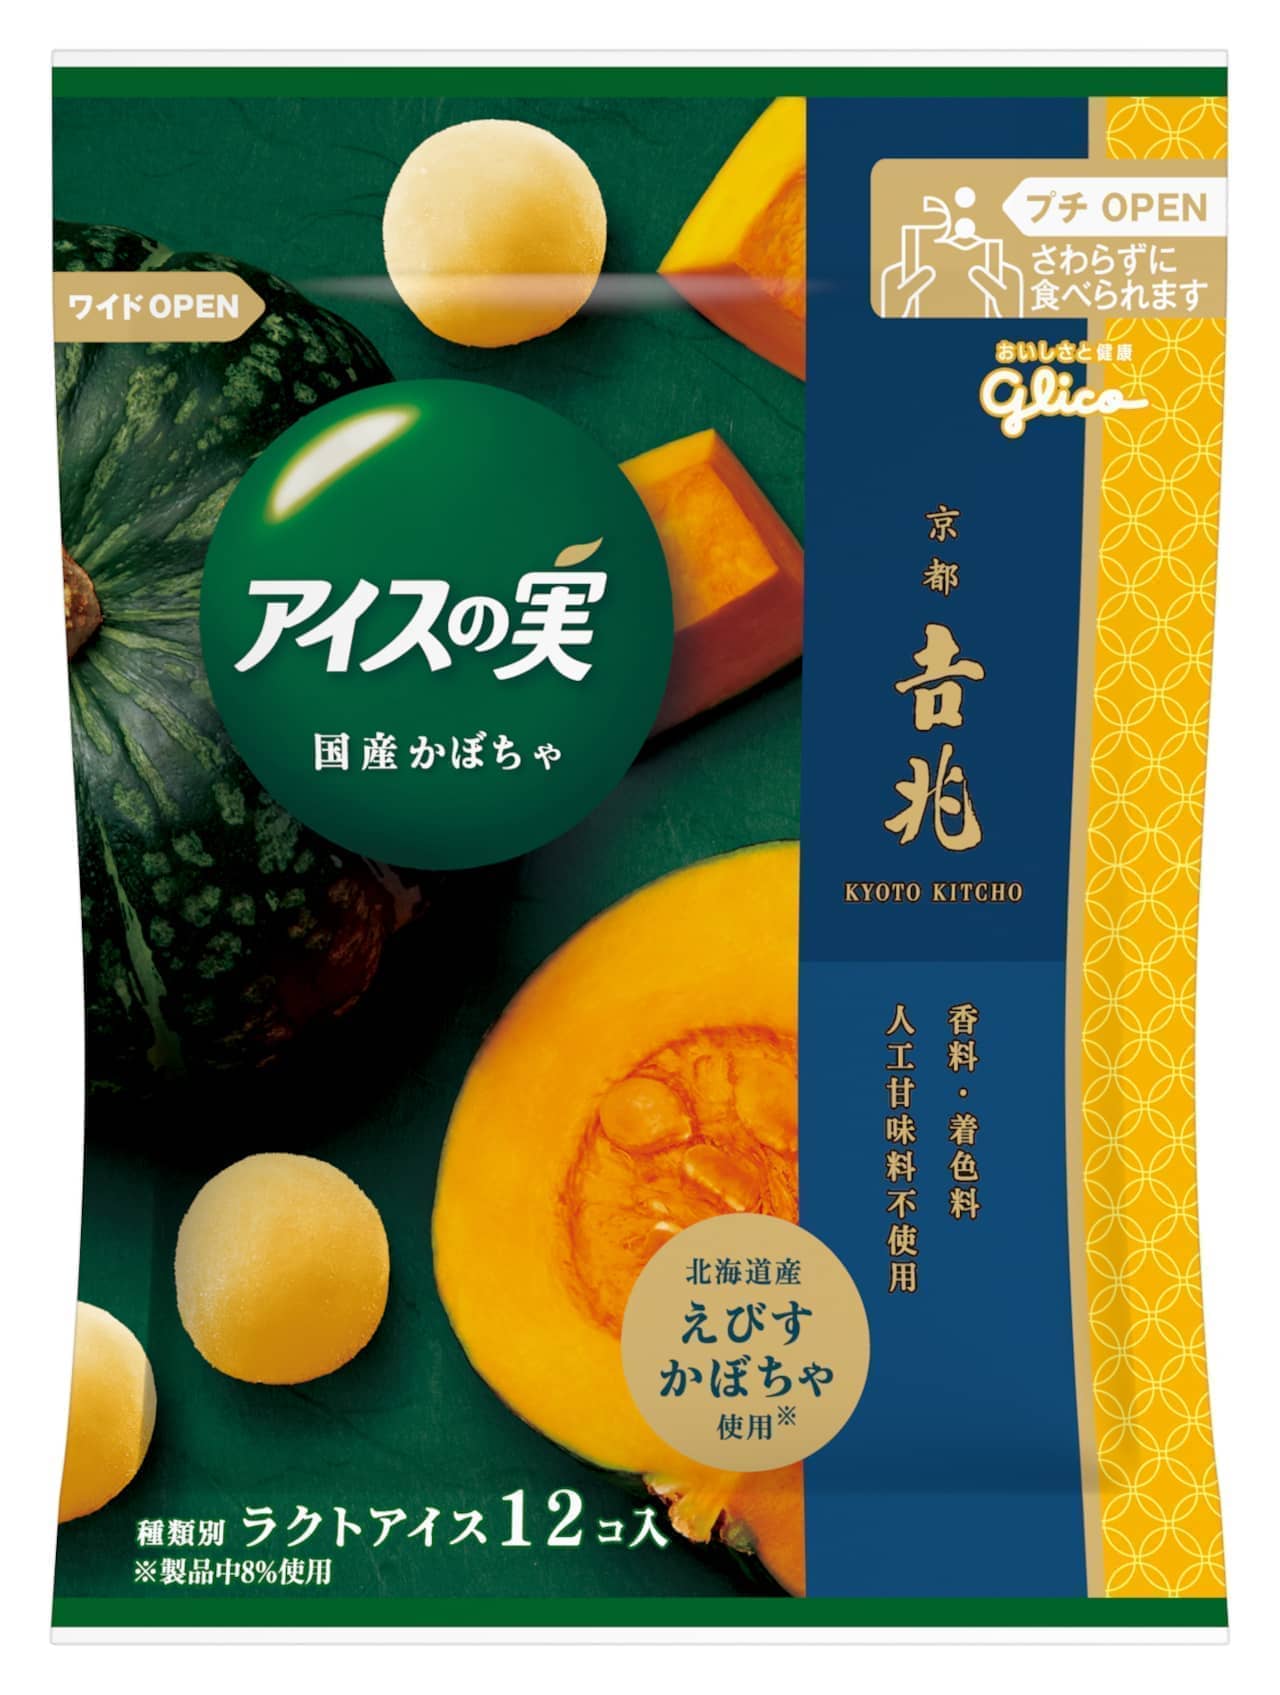 Glico "Ice Fruit [Domestic Vegetable Series]"